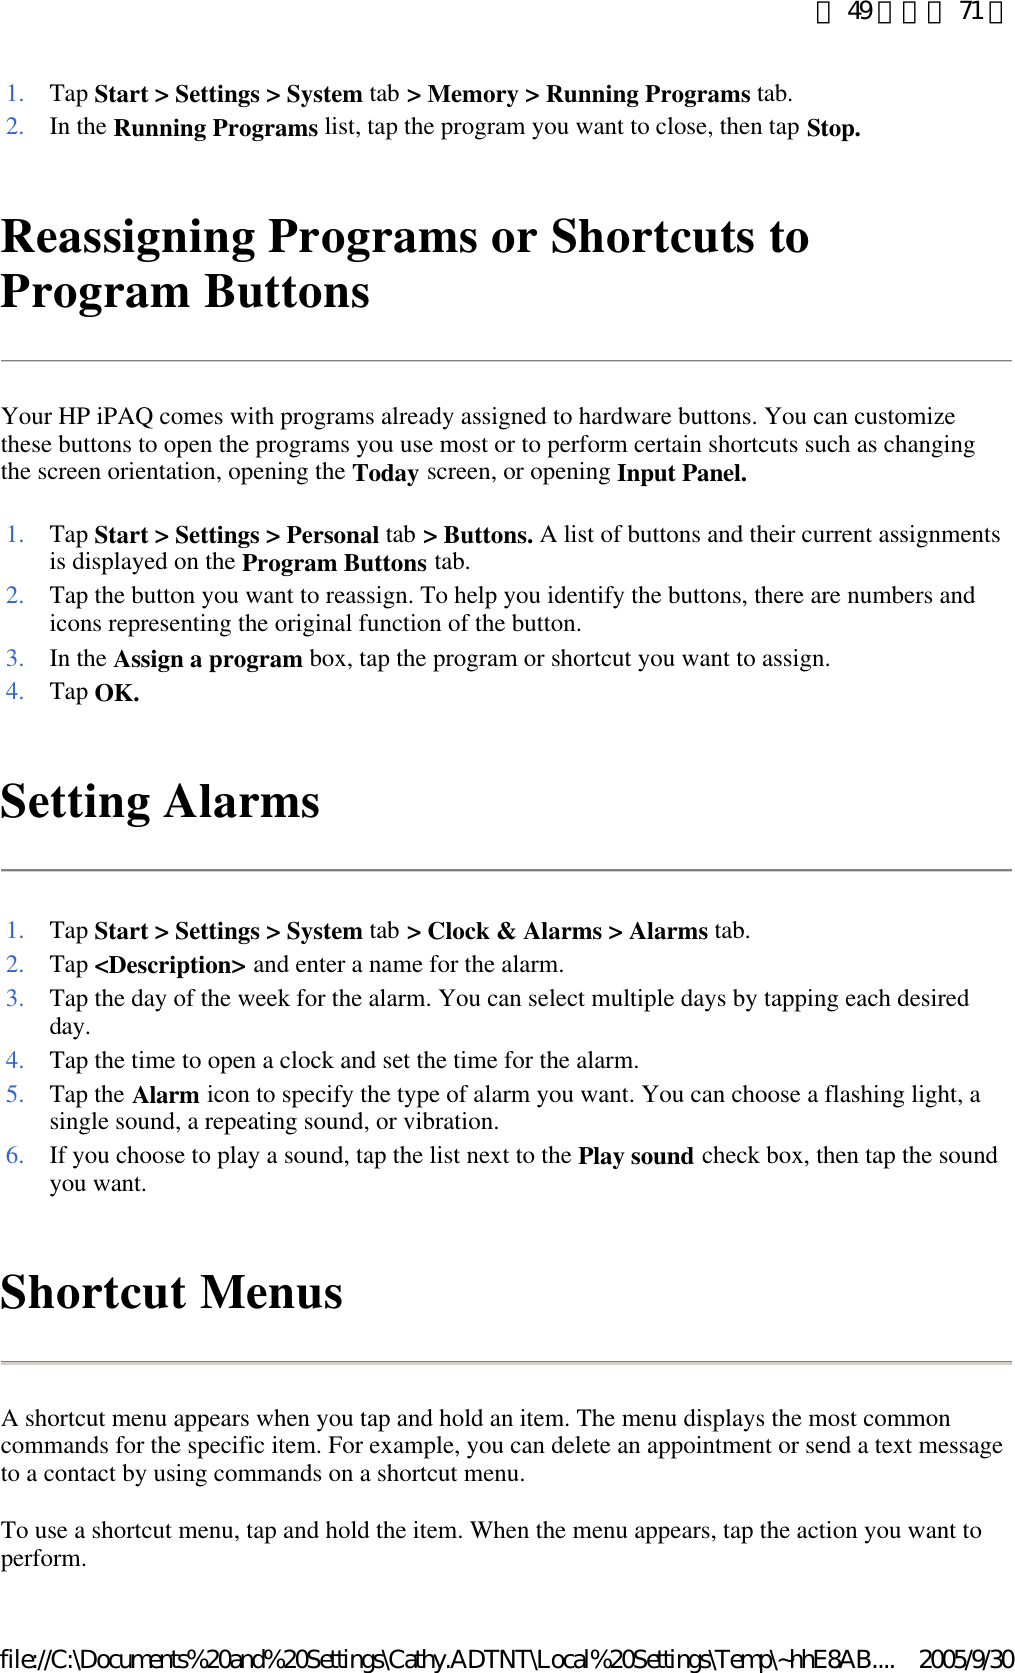 Reassigning Programs or Shortcuts to Program Buttons  Your HP iPAQ comes with programs already assigned to hardware buttons. You can customize these buttons to open the programs you use most or to perform certain shortcuts such as changing the screen orientation, opening the Today screen, or opening Input Panel. Setting Alarms  Shortcut Menus  A shortcut menu appears when you tap and hold an item. The menu displays the most common commands for the specific item. For example, you can delete an appointment or send a text message to a contact by using commands on a shortcut menu.  To use a shortcut menu, tap and hold the item. When the menu appears, tap the action you want to perform.  1. Tap Start &gt; Settings &gt; System tab &gt; Memory &gt; Running Programs tab. 2. In the Running Programs list, tap the program you want to close, then tap Stop.1. Tap Start &gt; Settings &gt; Personal tab &gt; Buttons. A list of buttons and their current assignments is displayed on the Program Buttons tab. 2. Tap the button you want to reassign. To help you identify the buttons, there are numbers and icons representing the original function of the button. 3. In the Assign a program box, tap the program or shortcut you want to assign. 4. Tap OK.1. Tap Start &gt; Settings &gt; System tab &gt; Clock &amp; Alarms &gt; Alarms tab. 2. Tap &lt;Description&gt; and enter a name for the alarm. 3. Tap the day of the week for the alarm. You can select multiple days by tapping each desired day. 4. Tap the time to open a clock and set the time for the alarm. 5. Tap the Alarm icon to specify the type of alarm you want. You can choose a flashing light, a single sound, a repeating sound, or vibration. 6. If you choose to play a sound, tap the list next to the Play sound check box, then tap the sound you want. 第 49 頁，共 71 頁2005/9/30file://C:\Documents%20and%20Settings\Cathy.ADTNT\Local%20Settings\Temp\~hhE8AB....